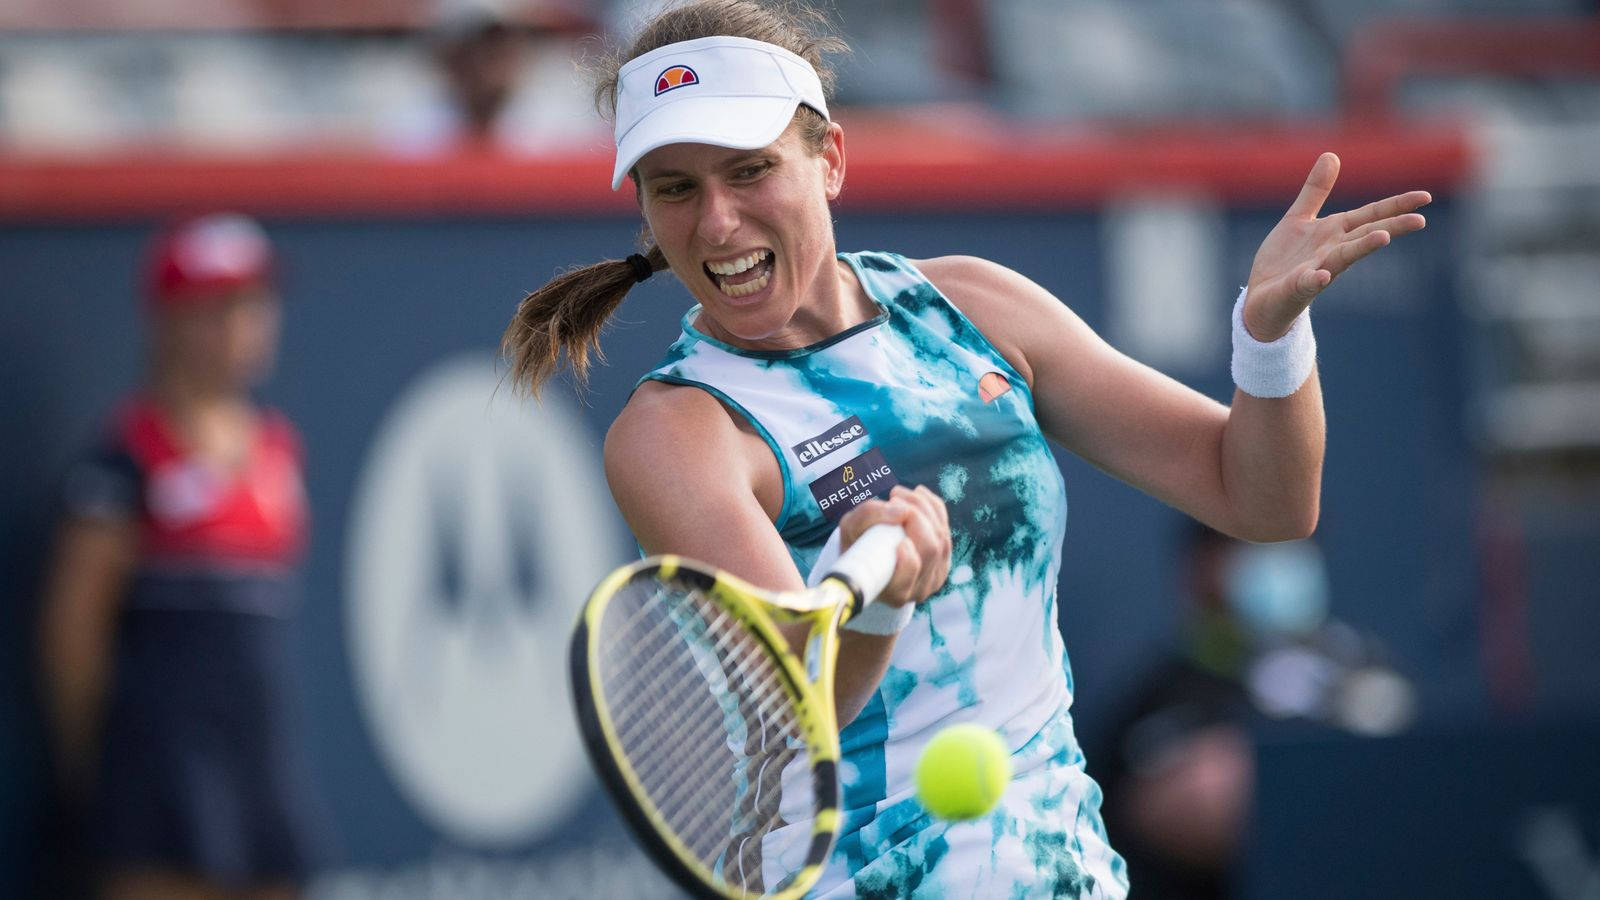 Johanna Konta in Powerful Action During a Match Wallpaper